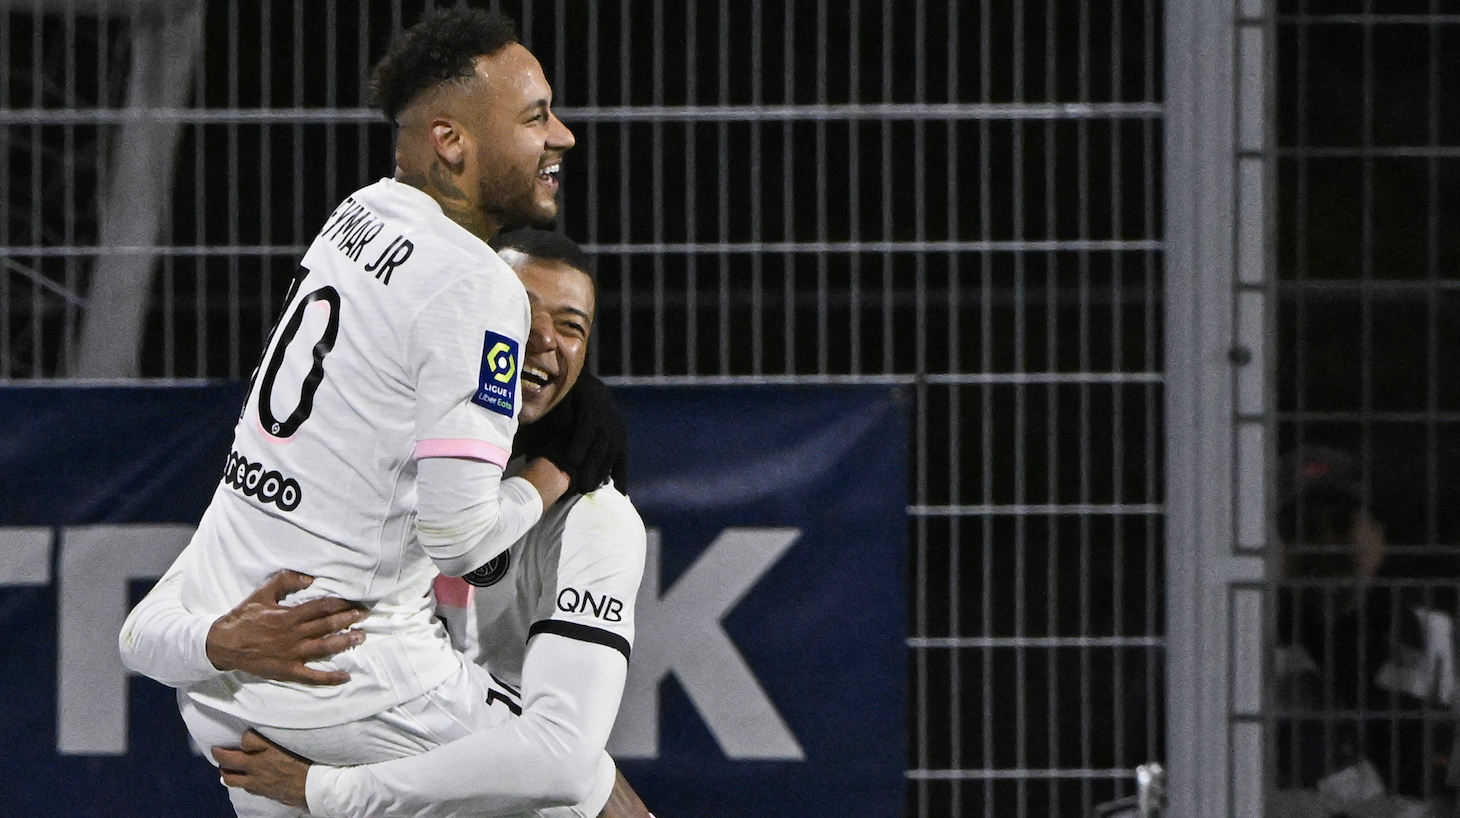 Paris Saint-Germain's Brazilian forward Neymar (L) celebrates with Paris Saint-Germain's French forward Kylian Mbappe after scoring three goals during the French L1 football match between Clermont Foot 63 and Paris Saint-Germain (PSG) at the Gabriel-Montpied stadium in Clermont-Ferrand, central France, on April 9, 2022.